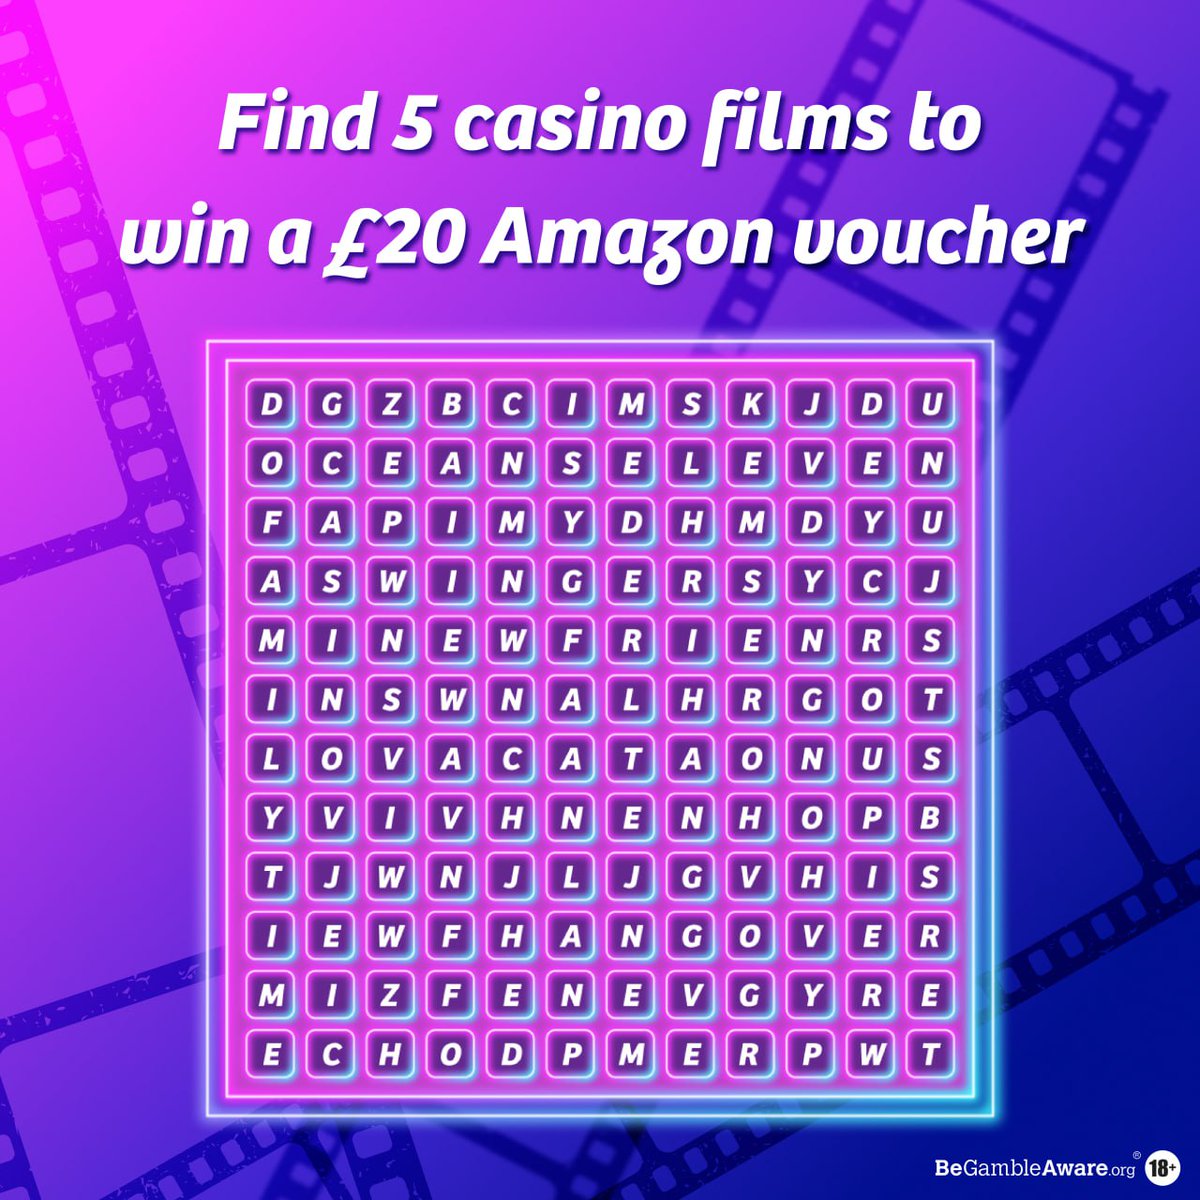 Attention all movie buffs! 🎬 Spot 5 casino films in our word search for the chance to win a £20 Amazon voucher! Need some hints? Check our recent blog for clues: bit.ly/4aLh8Bp _________ Three randomly selected winners will be announced on 14th May to win a £20 Amazon…